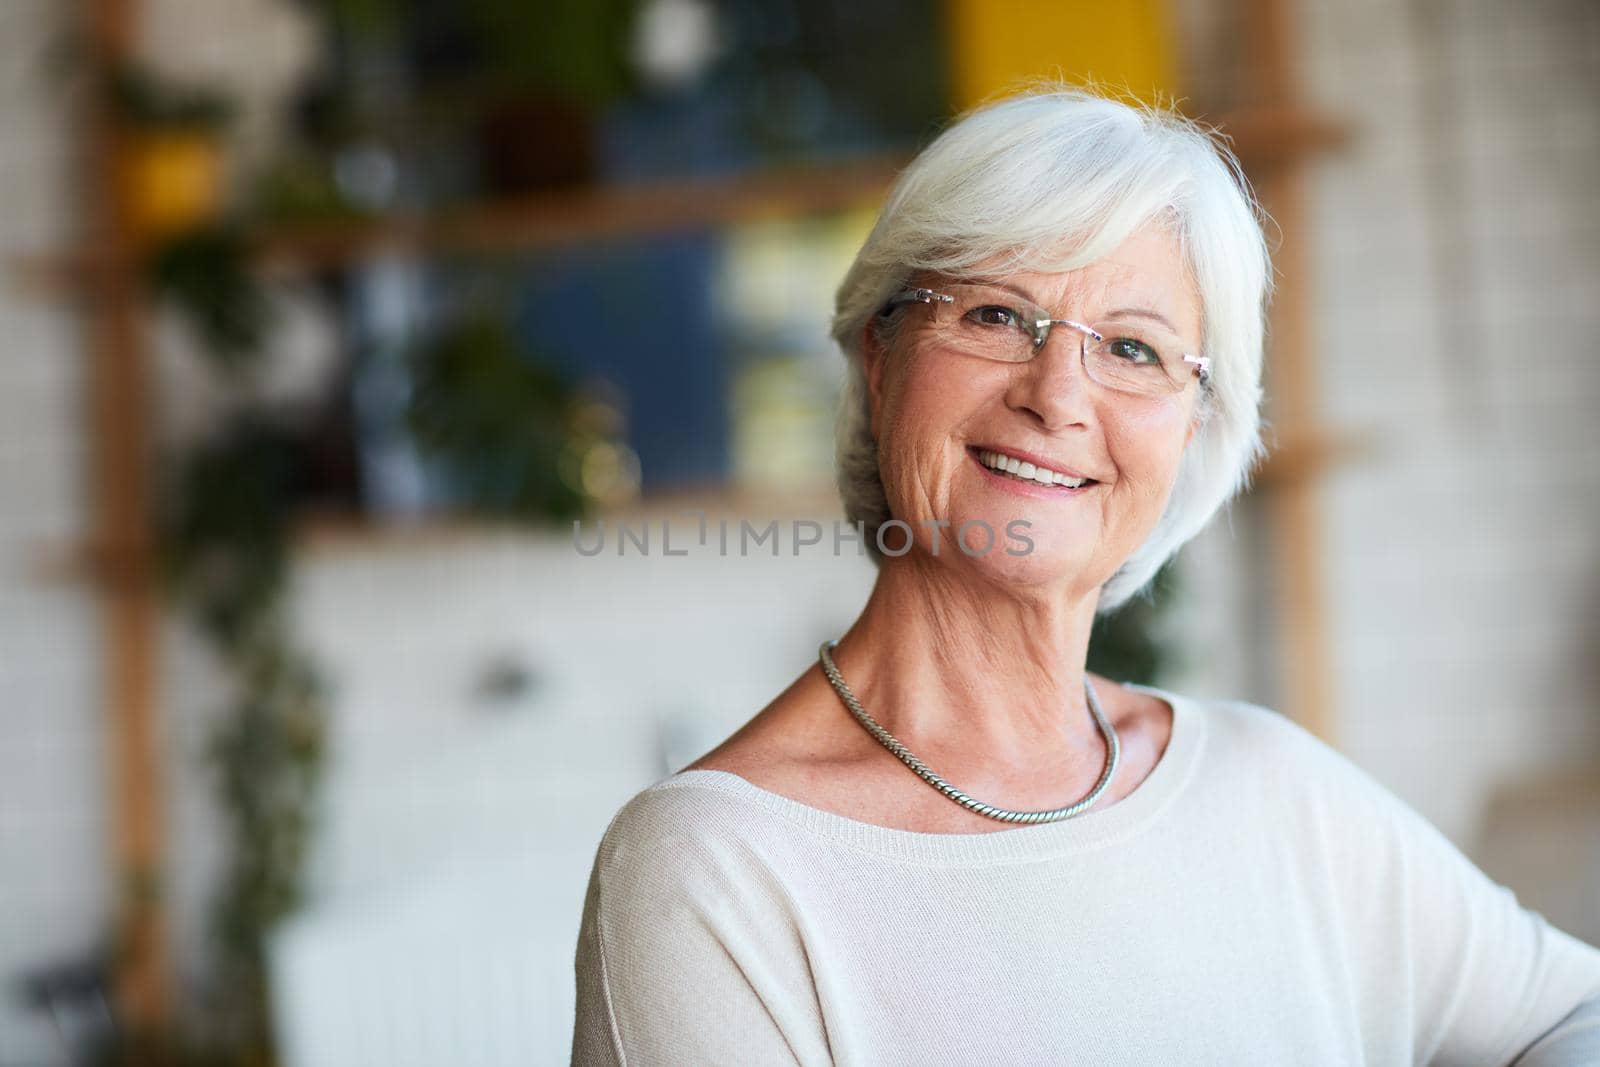 Cropped portrait of a senior woman sitting in her local coffee shop.